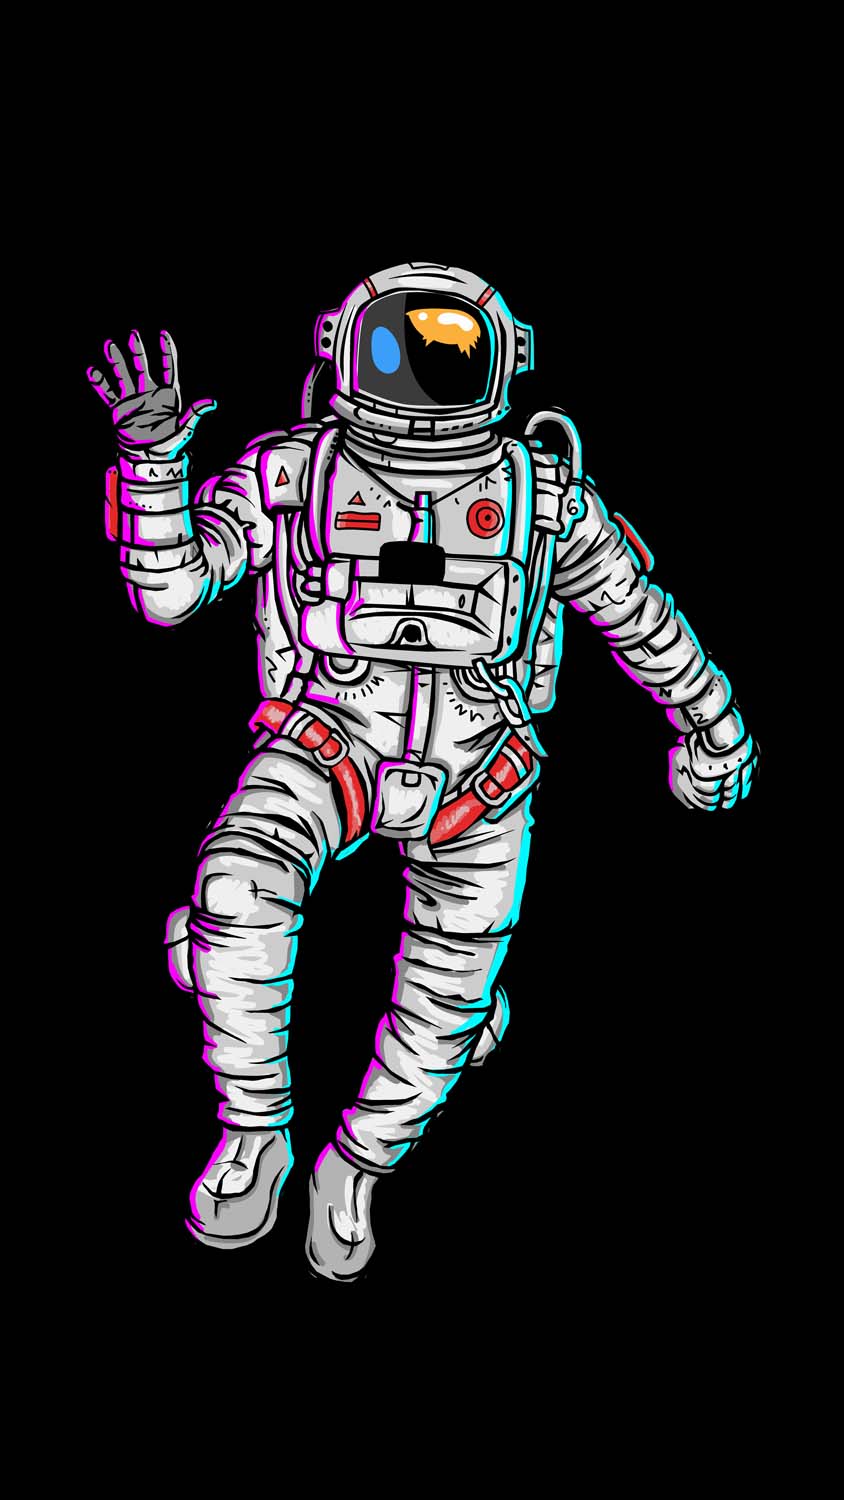 Space Hello iPhone Wallpaper HD